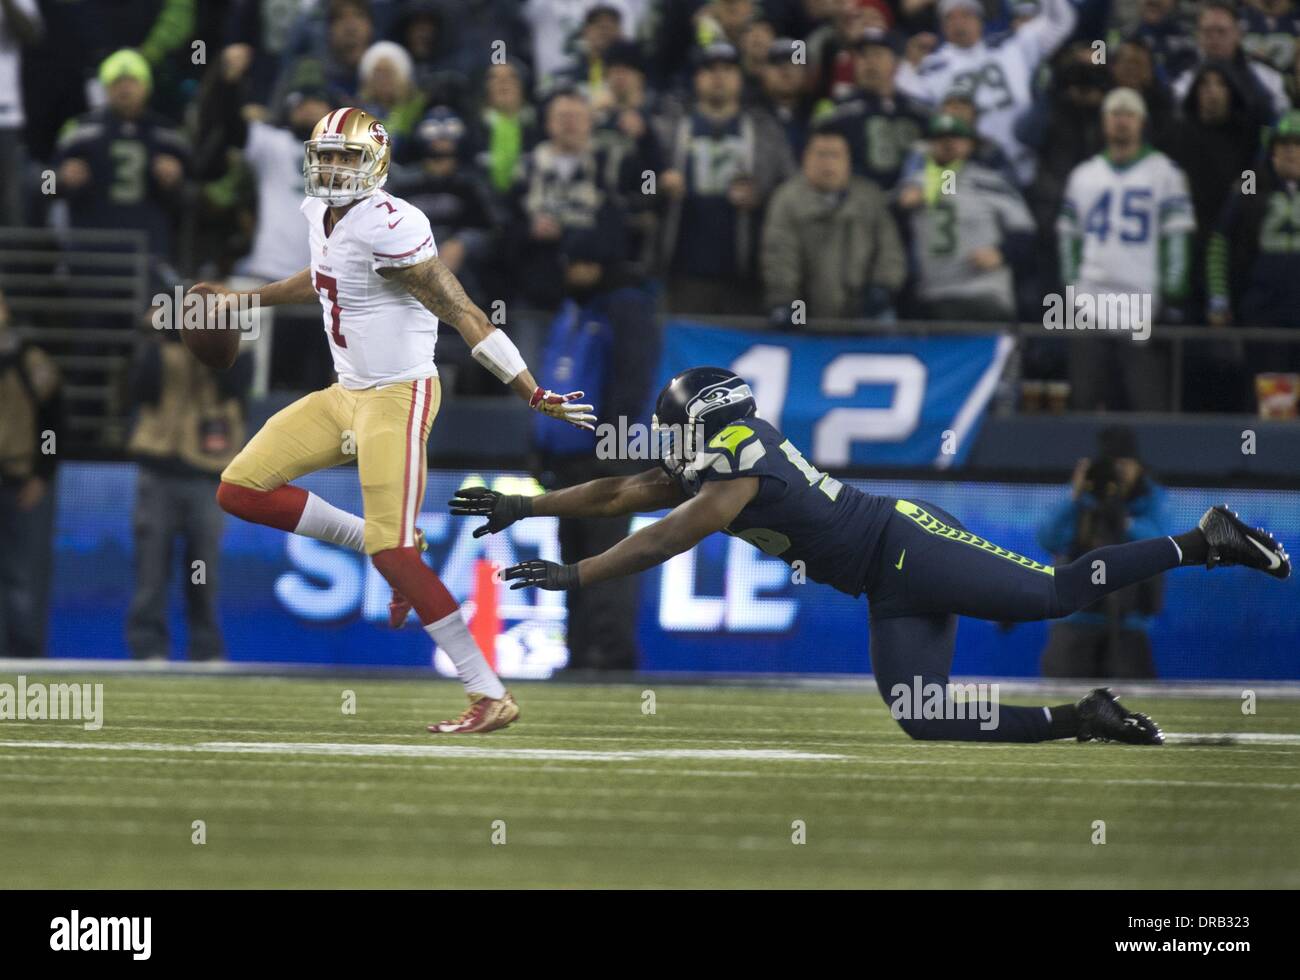 Seattle, WASH, USA. 19th Jan, 2014. San Francisco 49ers quarterback Colin Kaepernick (7) scrambles as he is defended during the NFC championship game between the San Francisco 49ers and the Seattle Seahawks at CenturyLink Field in Seattle, Wash. on Sunday, Jan. 19, 2014. © Hector Amezcua/Sacramento Bee/ZUMAPRESS.com/Alamy Live News Stock Photo